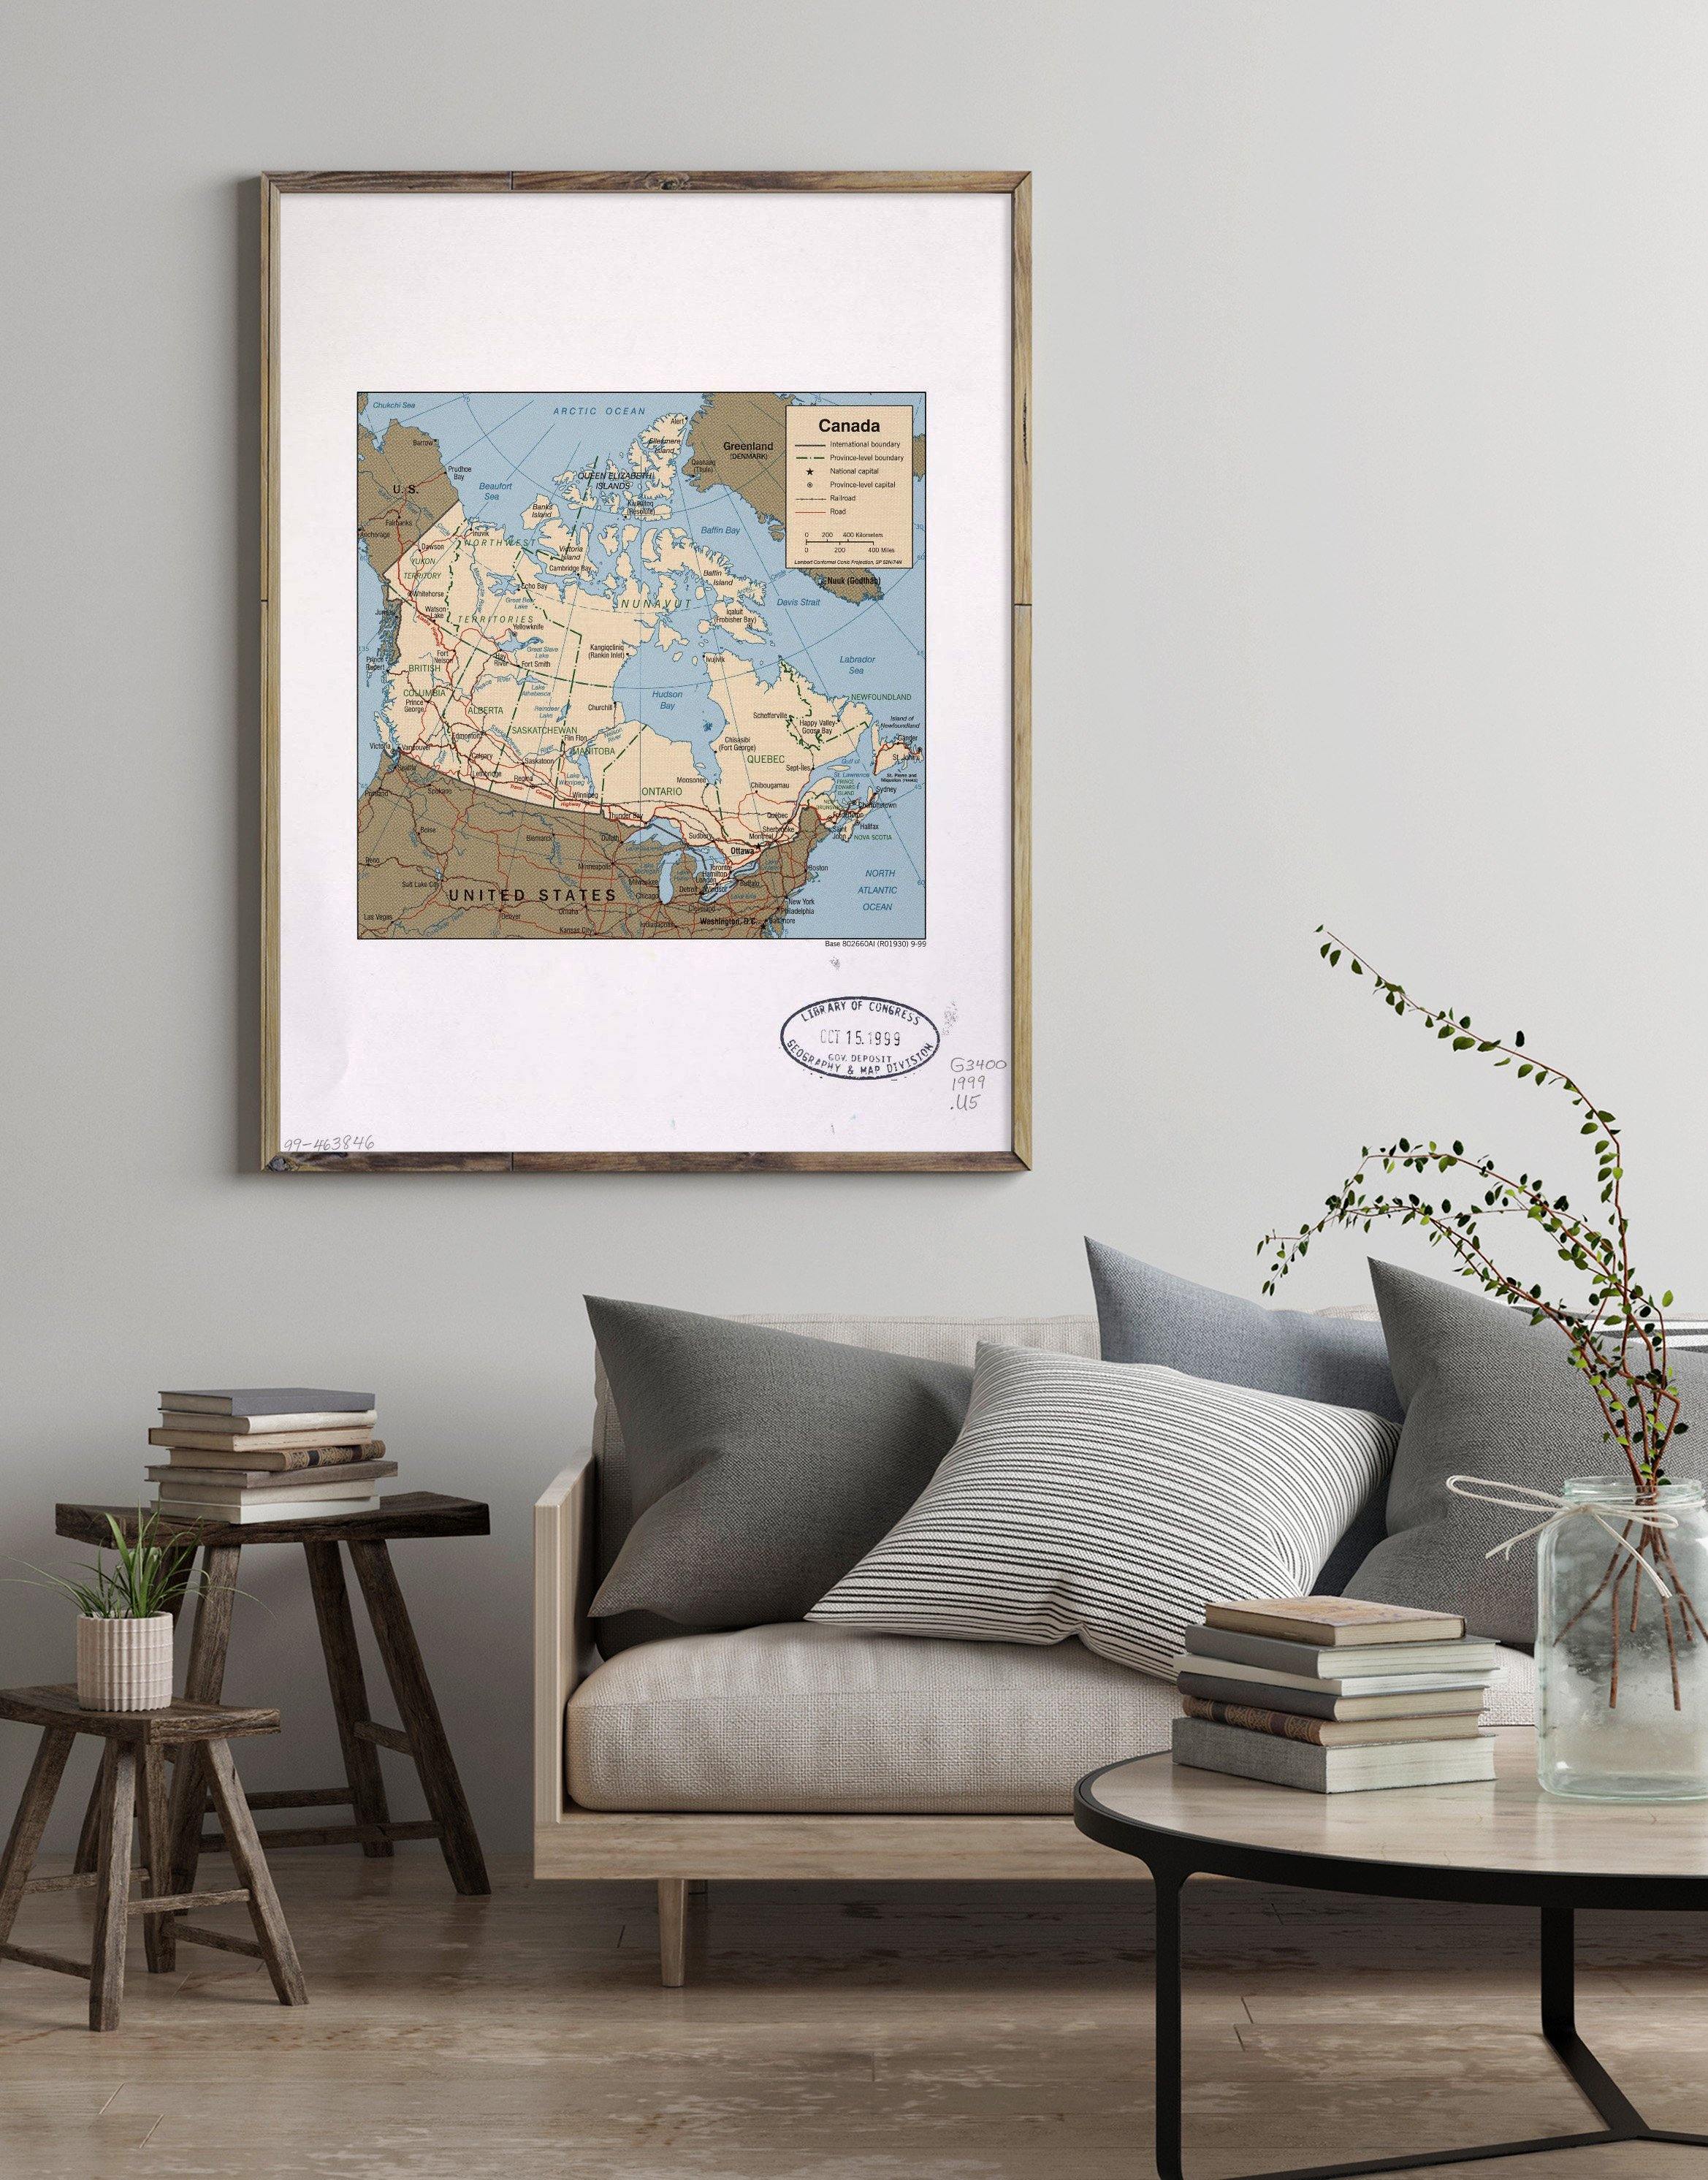 1999 Map| Canada| Canada Map Size: 18 inches x 24 inches |Fits 18x24 s - New York Map Company